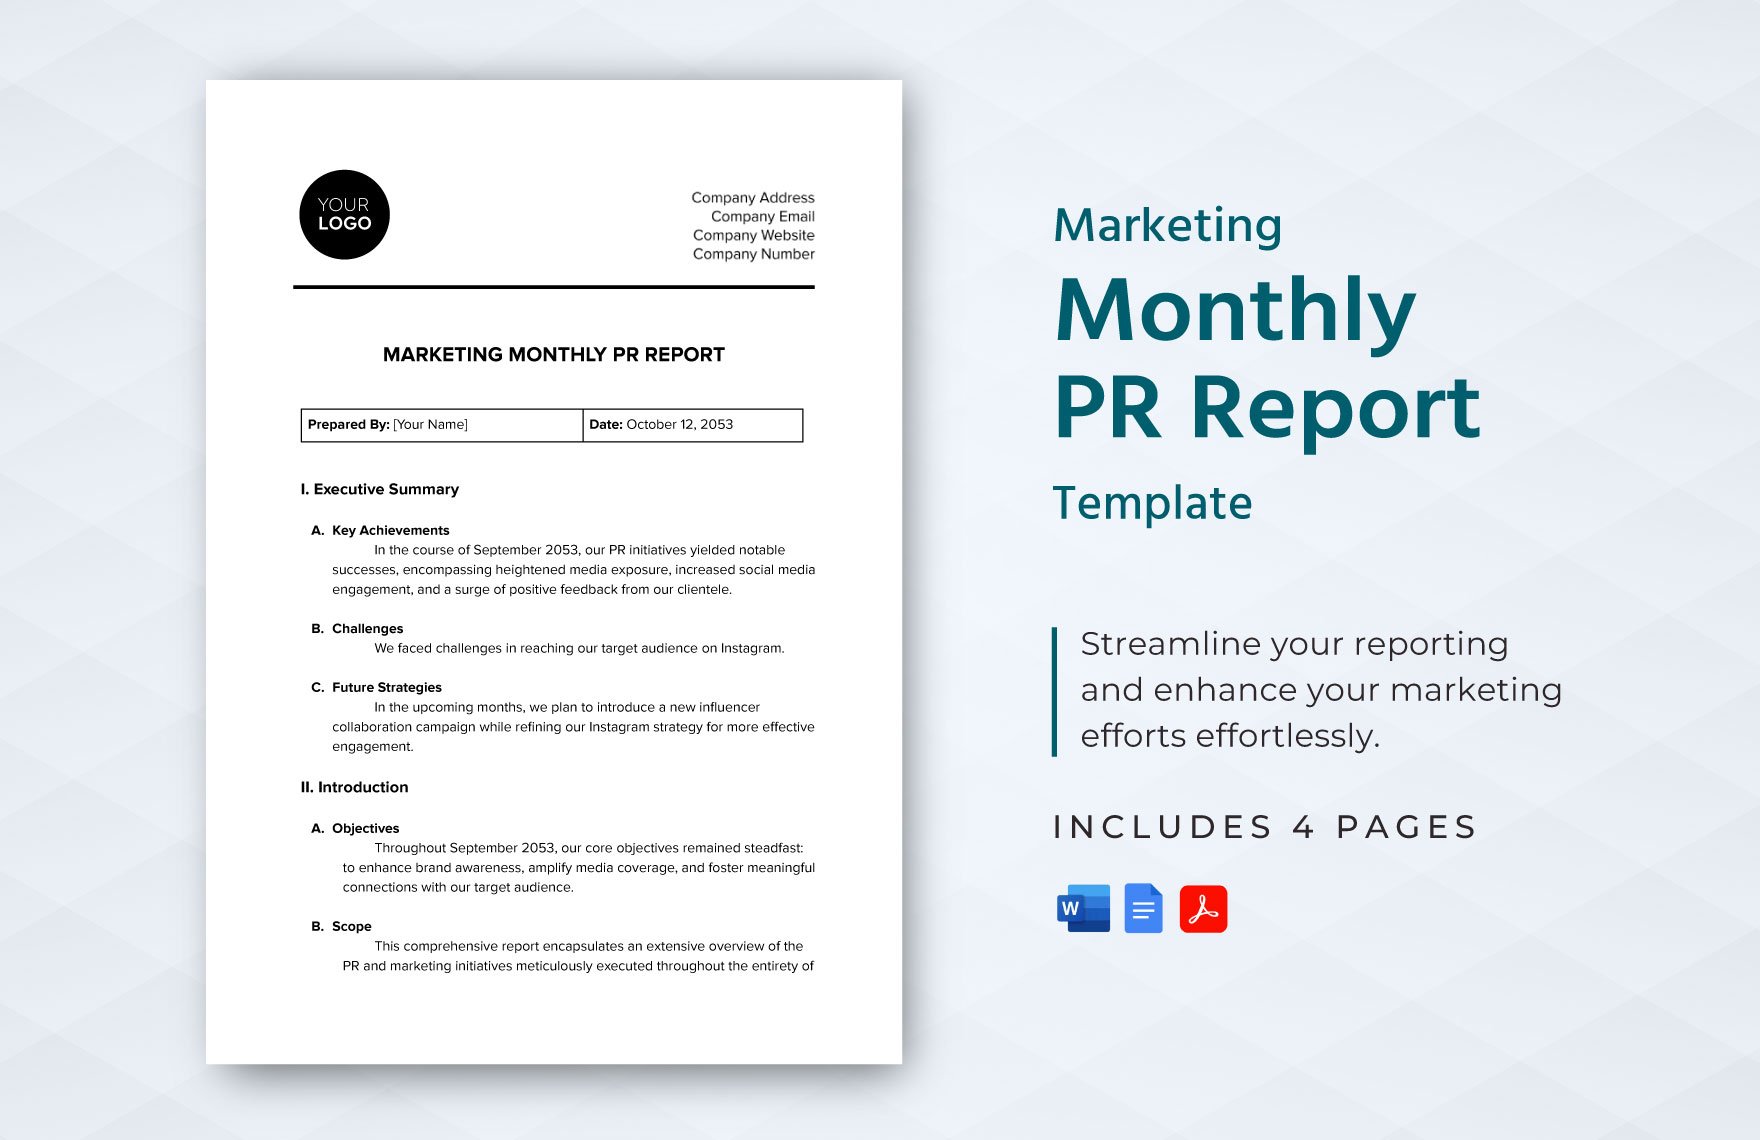 Marketing Monthly PR Report Template